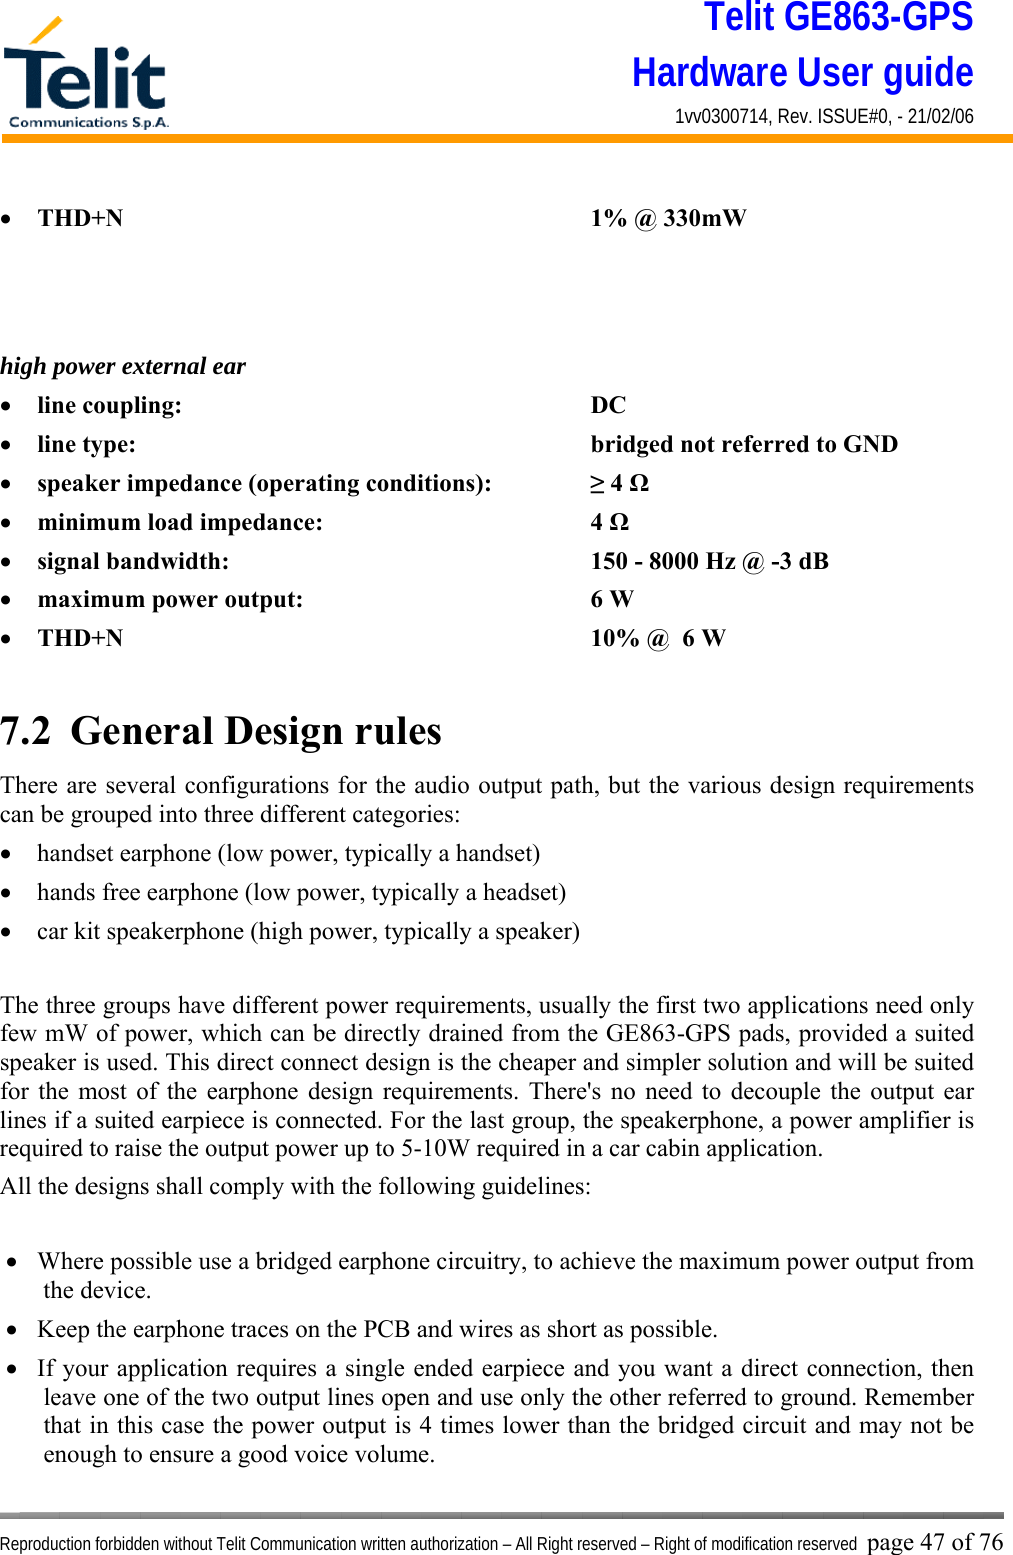 Telit GE863-GPS Hardware User guide 1vv0300714, Rev. ISSUE#0, - 21/02/06    Reproduction forbidden without Telit Communication written authorization – All Right reserved – Right of modification reserved page 47 of 76 •  THD+N       1% @ 330mW    high power external ear •  line coupling:      DC  •  line type:       bridged not referred to GND •  speaker impedance (operating conditions):    ≥ 4 Ω •  minimum load impedance:    4 Ω •  signal bandwidth:          150 - 8000 Hz @ -3 dB  •  maximum power output:    6 W  •  THD+N       10% @  6 W  7.2  General Design rules There are several configurations for the audio output path, but the various design requirements can be grouped into three different categories: •  handset earphone (low power, typically a handset) •  hands free earphone (low power, typically a headset) •  car kit speakerphone (high power, typically a speaker)   The three groups have different power requirements, usually the first two applications need only few mW of power, which can be directly drained from the GE863-GPS pads, provided a suited speaker is used. This direct connect design is the cheaper and simpler solution and will be suited for the most of the earphone design requirements. There&apos;s no need to decouple the output ear lines if a suited earpiece is connected. For the last group, the speakerphone, a power amplifier is required to raise the output power up to 5-10W required in a car cabin application. All the designs shall comply with the following guidelines:  •  Where possible use a bridged earphone circuitry, to achieve the maximum power output from the device. •  Keep the earphone traces on the PCB and wires as short as possible. •  If your application requires a single ended earpiece and you want a direct connection, then leave one of the two output lines open and use only the other referred to ground. Remember that in this case the power output is 4 times lower than the bridged circuit and may not be enough to ensure a good voice volume.  